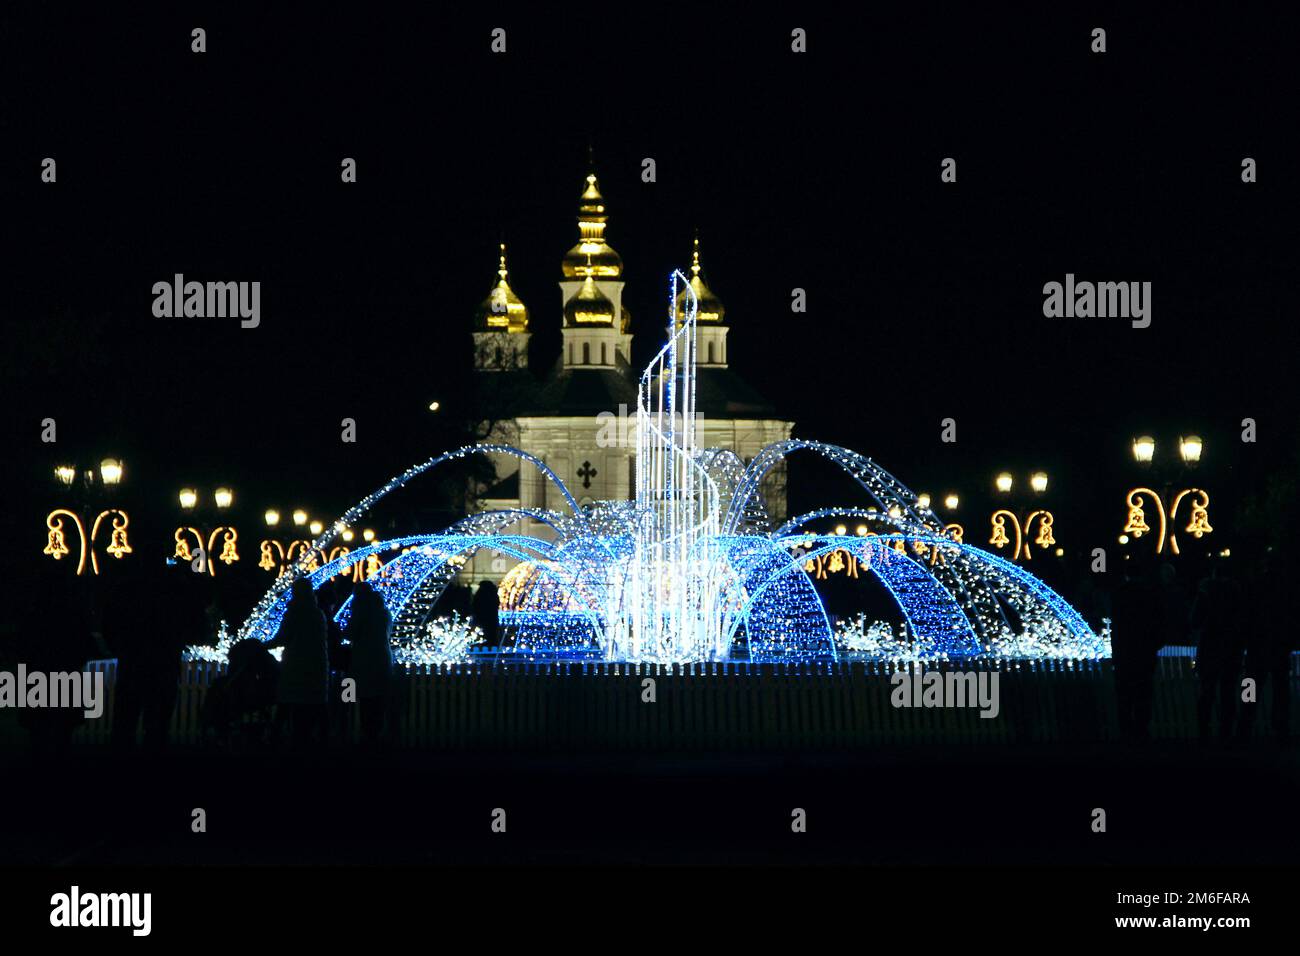 Beautiful fountains in city park. Colorful fountains from garlands. Christmas and New Year's winter Stock Photo